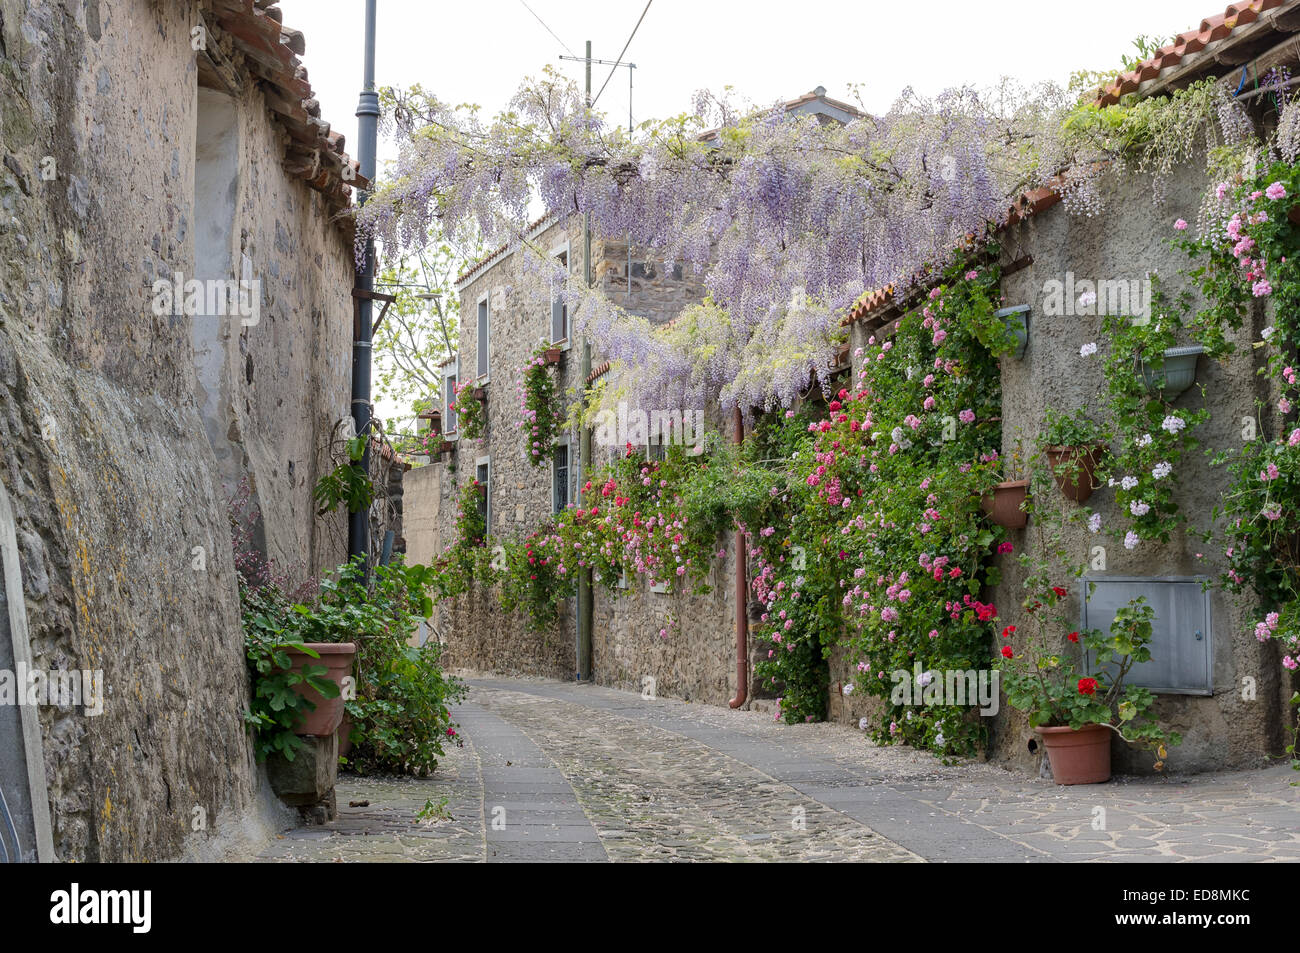 Narrow street of flowers in a small town in Sardinia Stock Photo